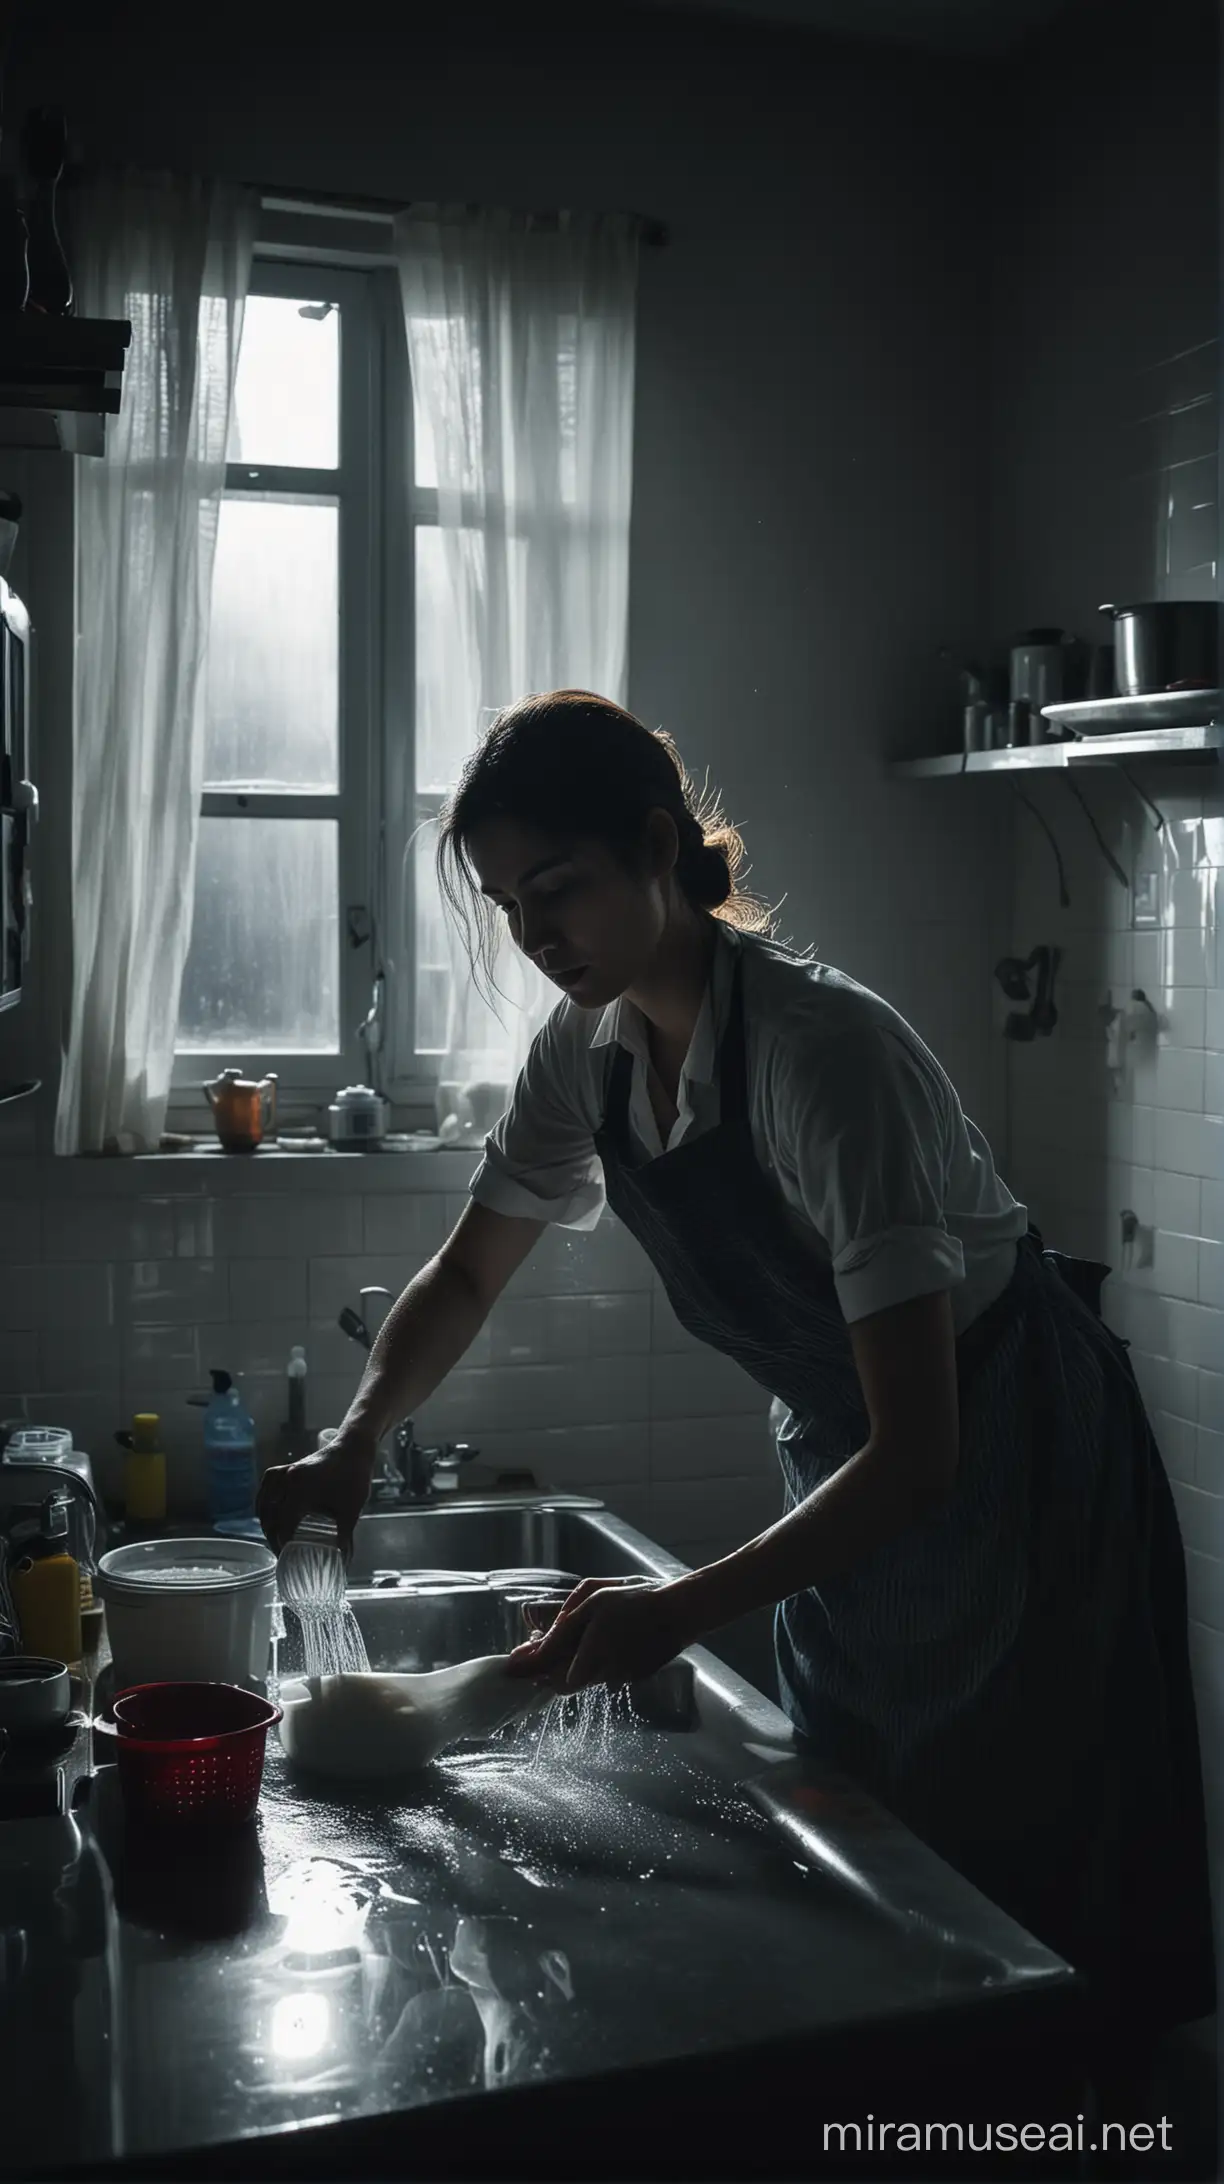 Cinematic Photography of a Poignant Moment Woman Washing Dishes in Dim Light